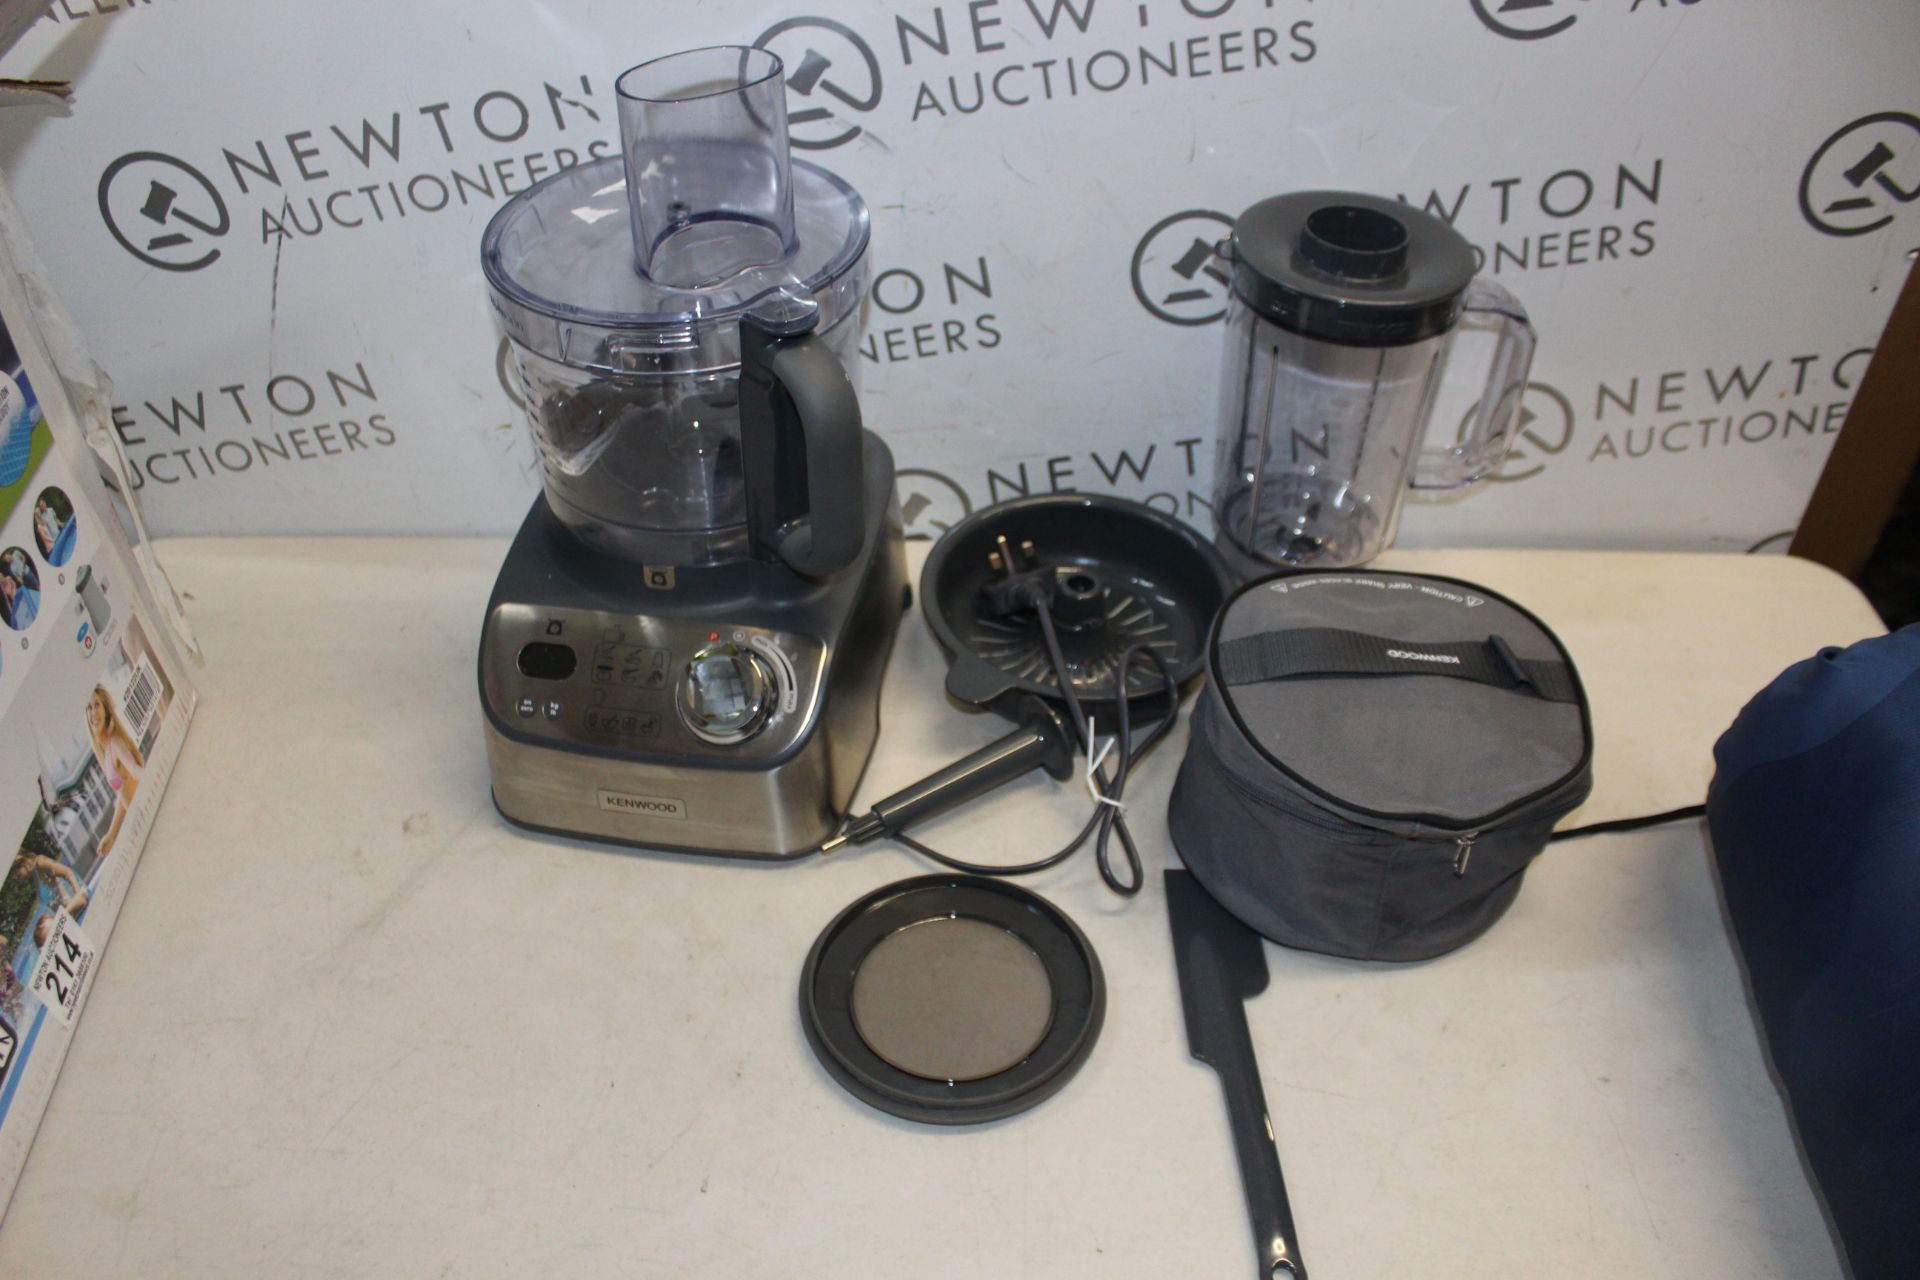 1 BOXED KENWOOD MULTIPRO COMPACT FOOD PROCESSOR, FDM71.450 RRP Â£149